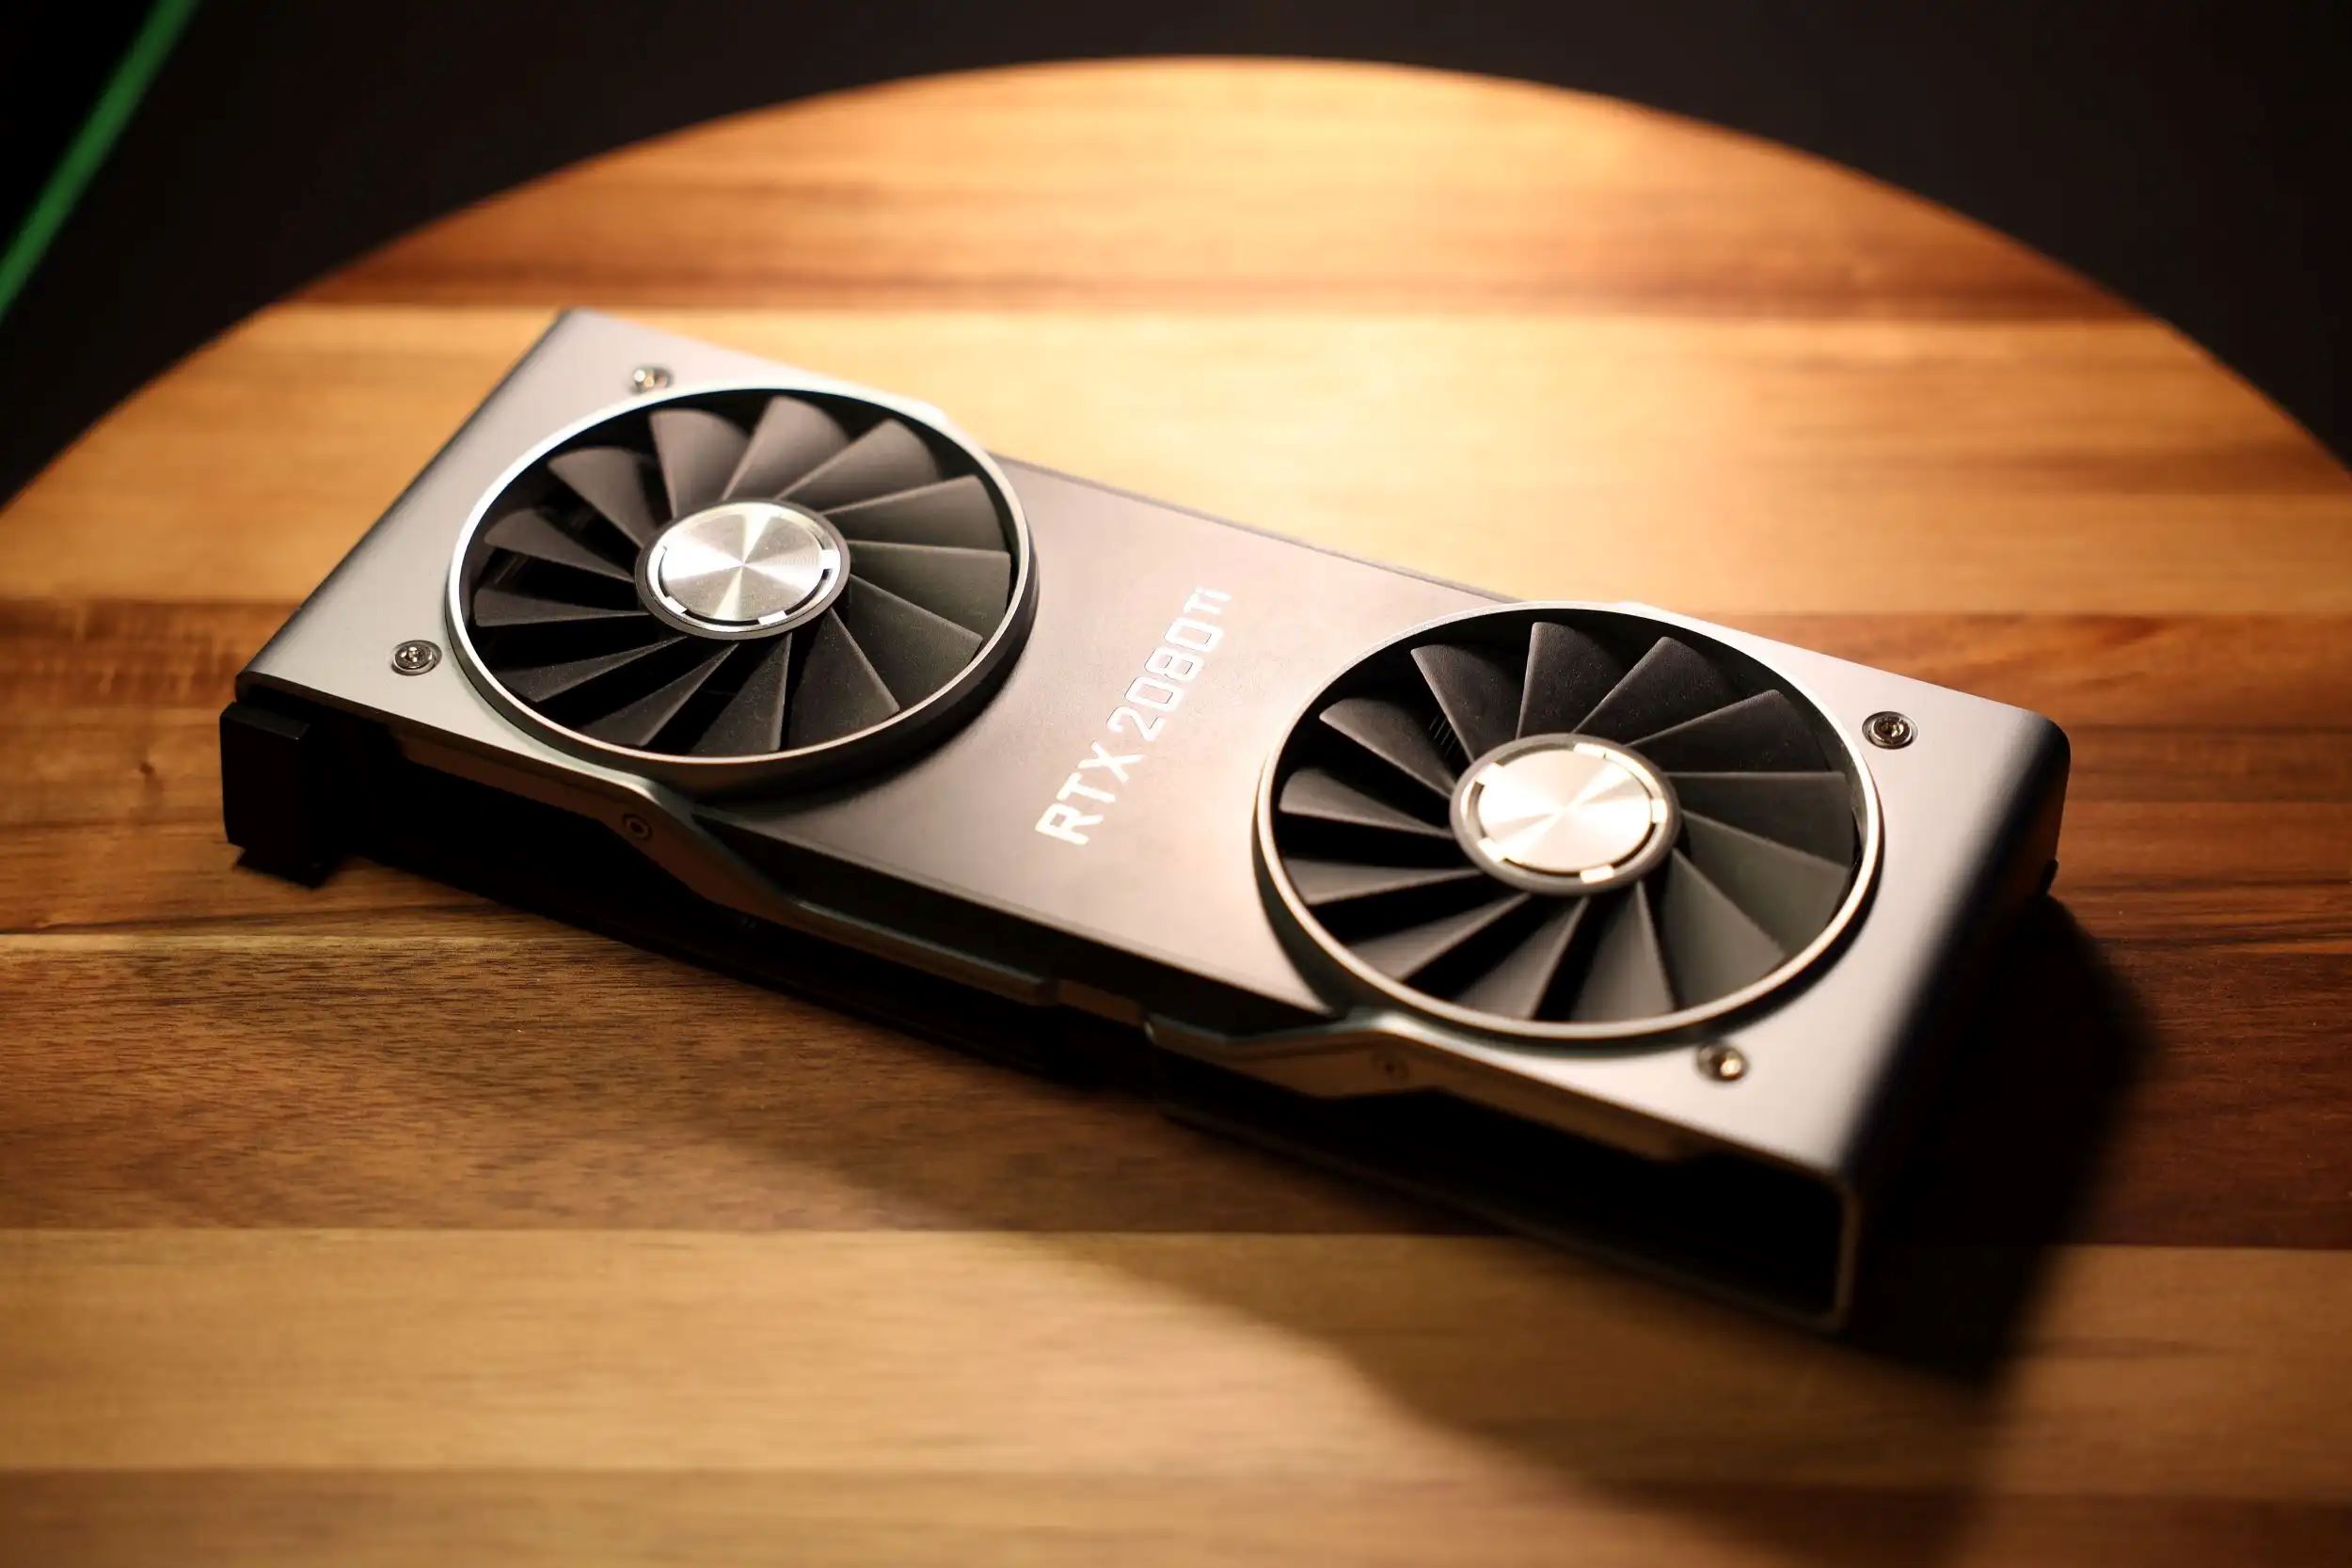 How To Choose The Right Graphics Card